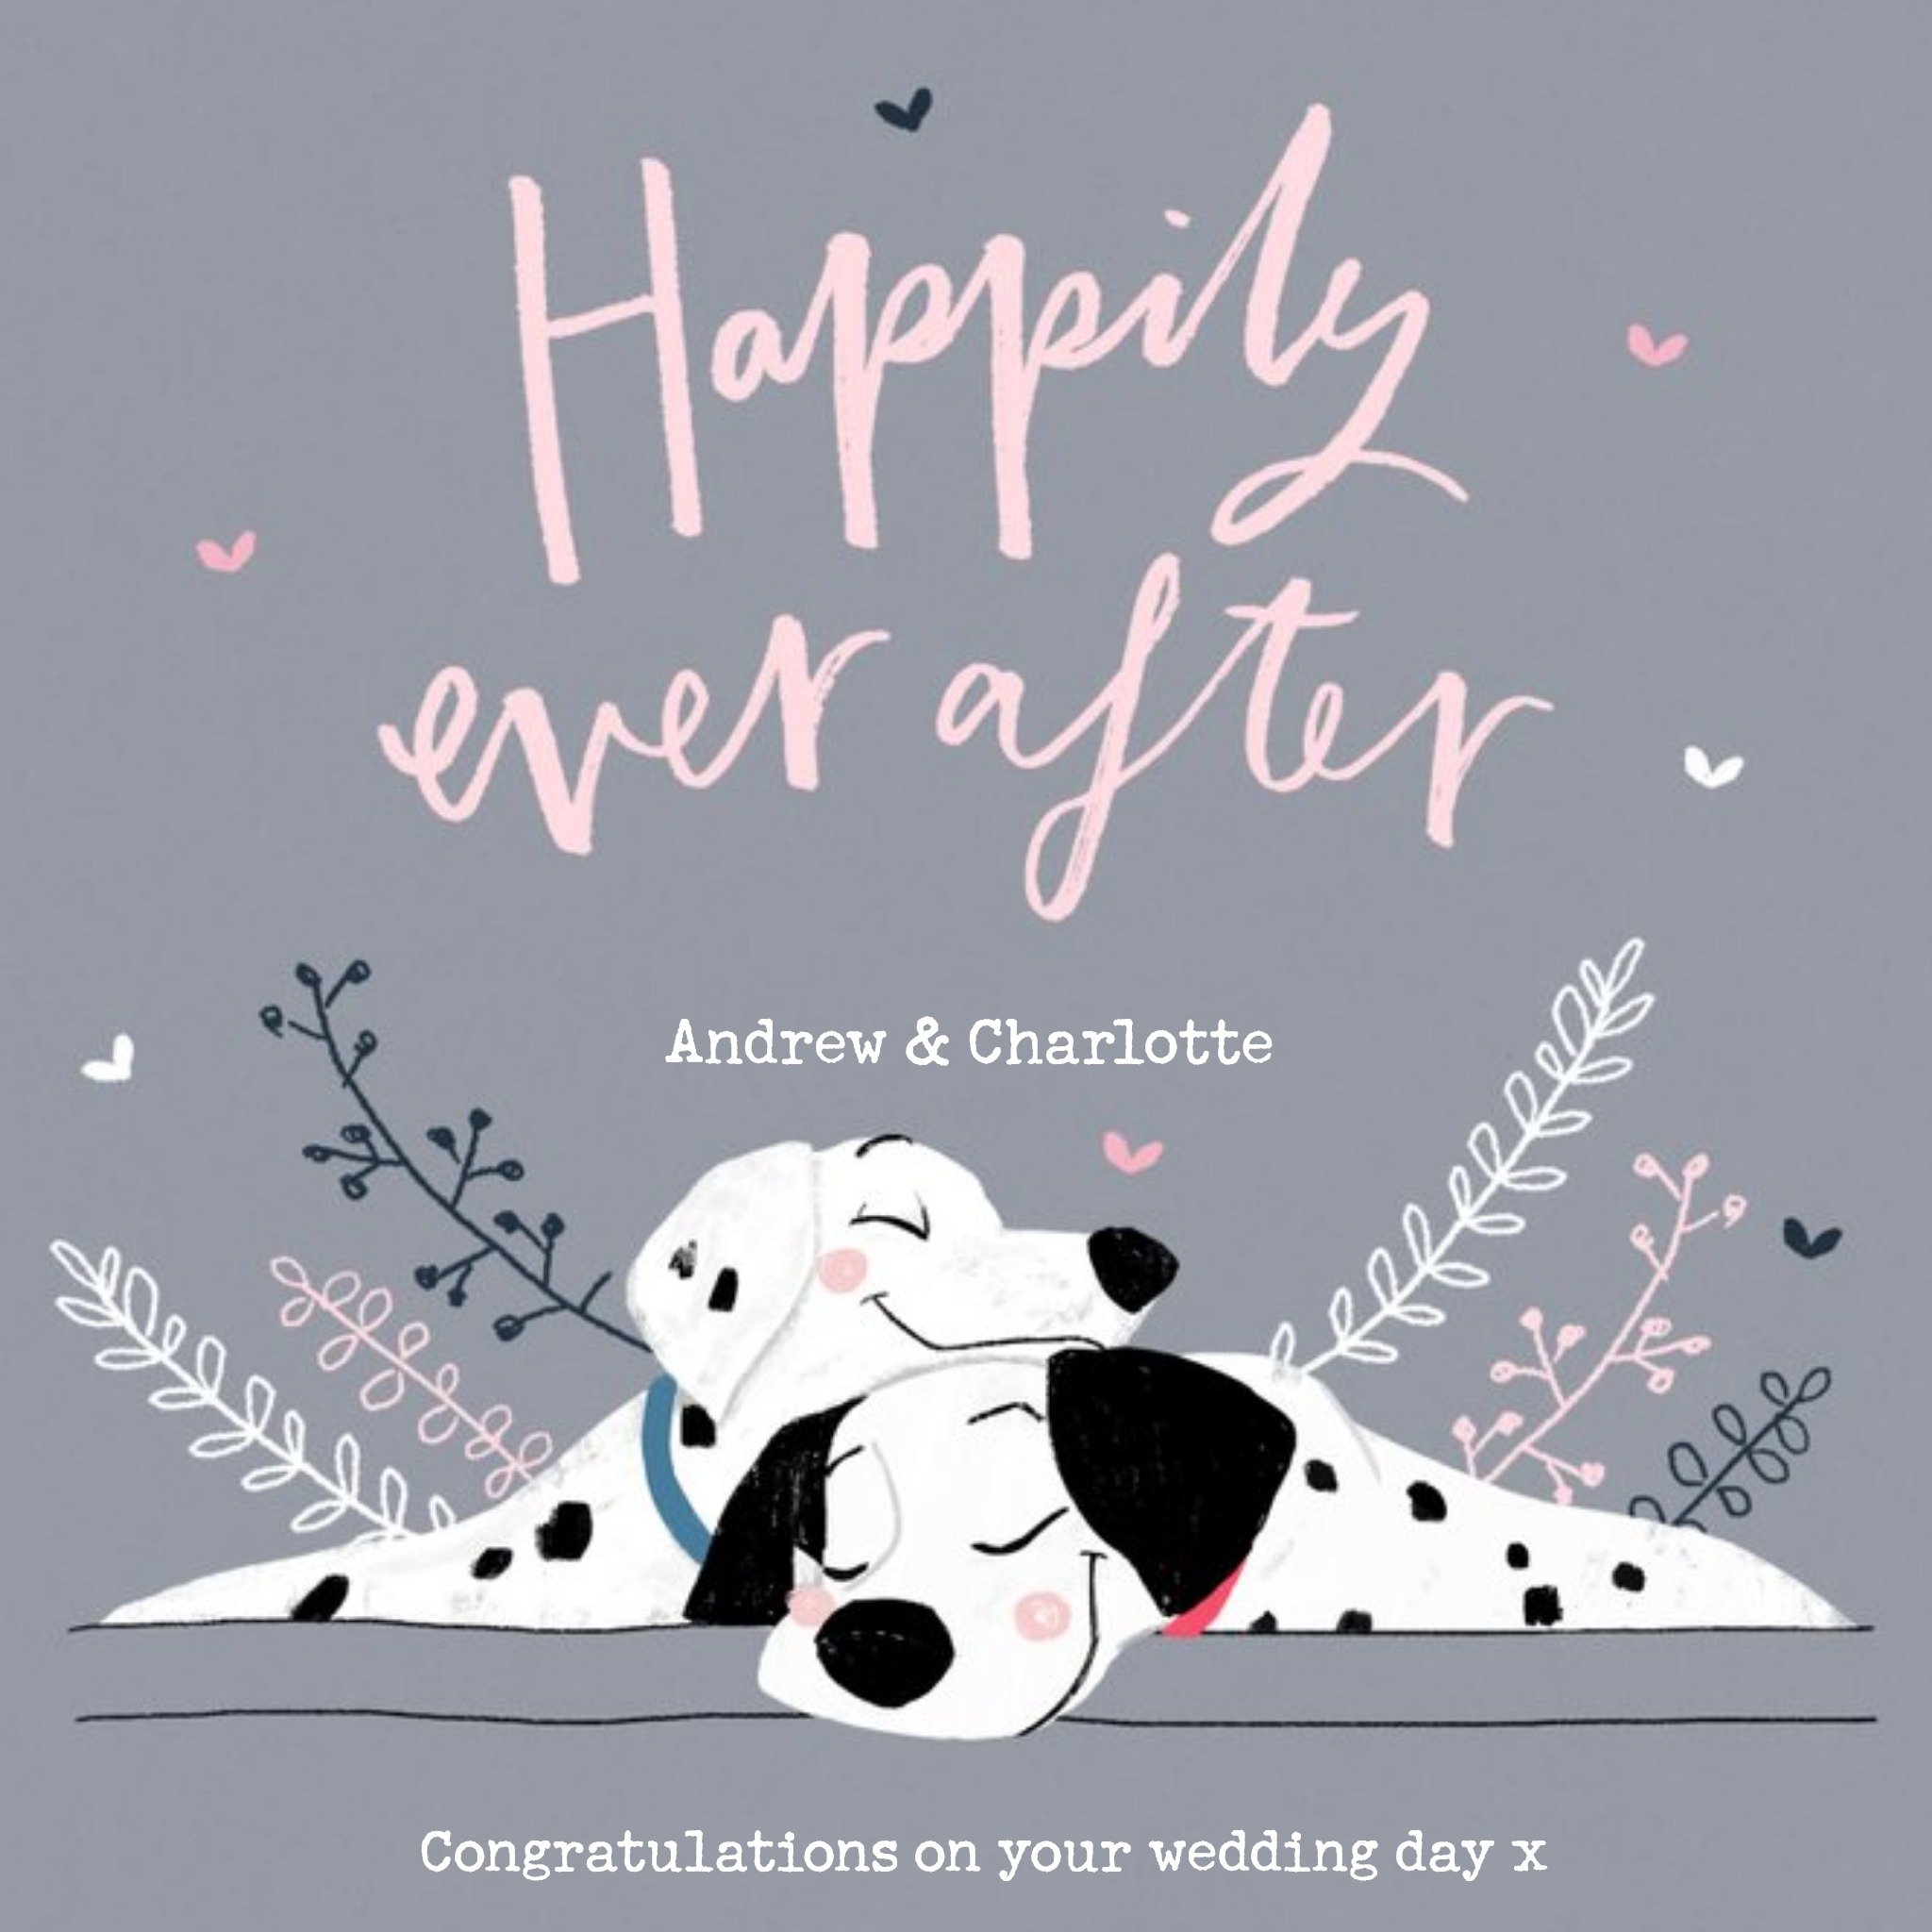 Disney 101 Dalmatians Happily Ever After Wedding Card, Square